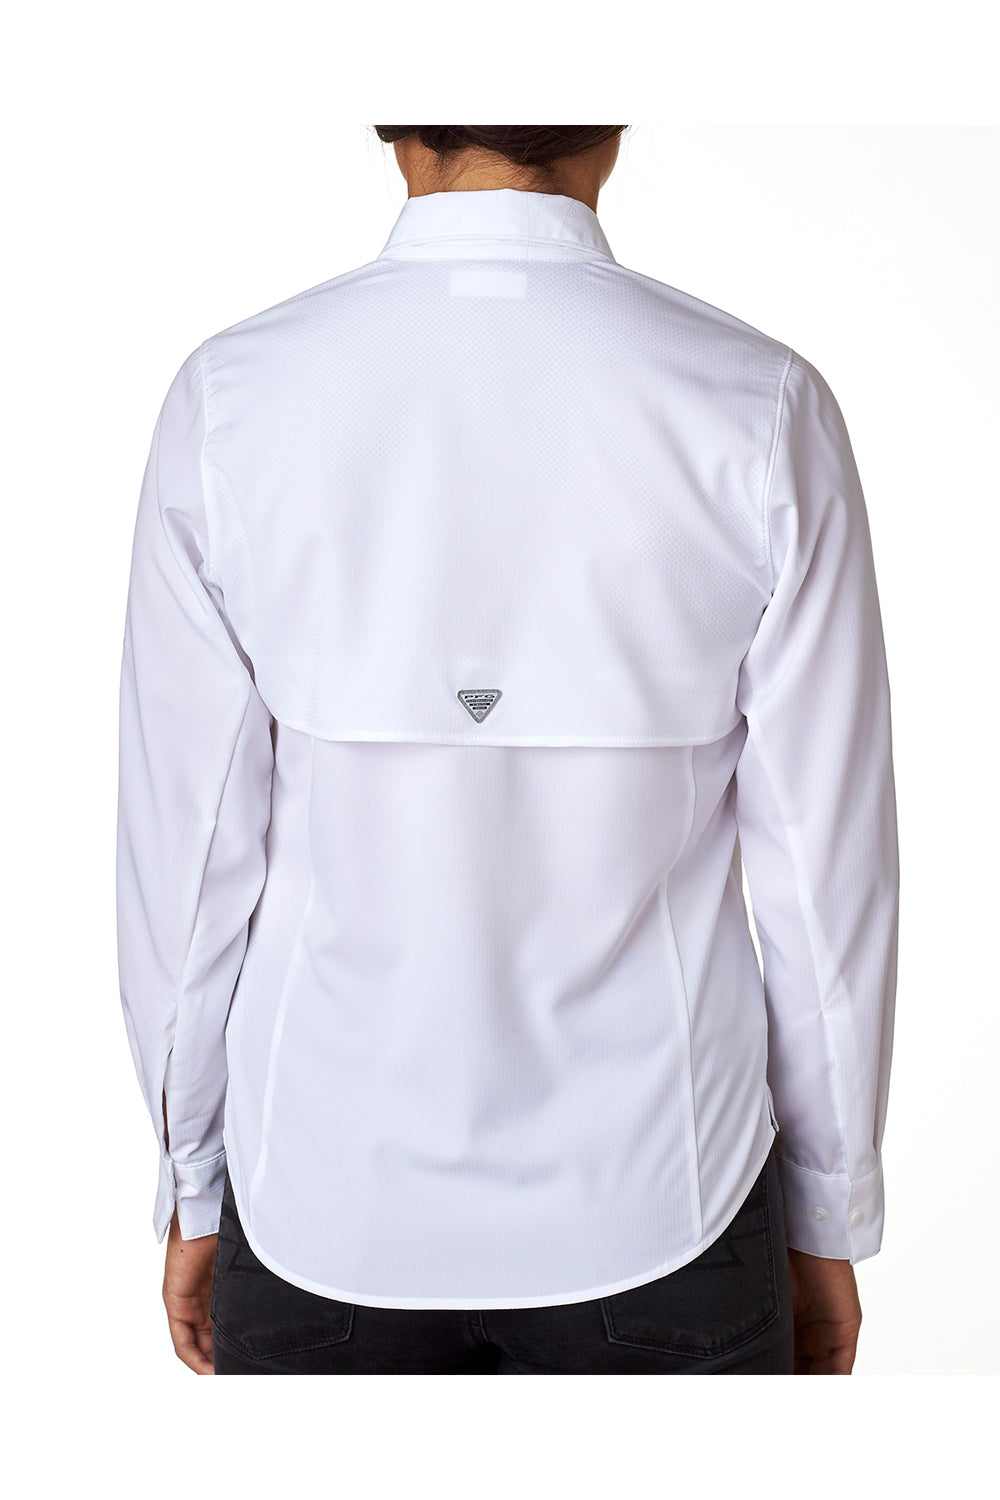 Columbia 7278 Womens Tamiami II Moisture Wicking Long Sleeve Button Down Shirt w/ Double Pockets White Back